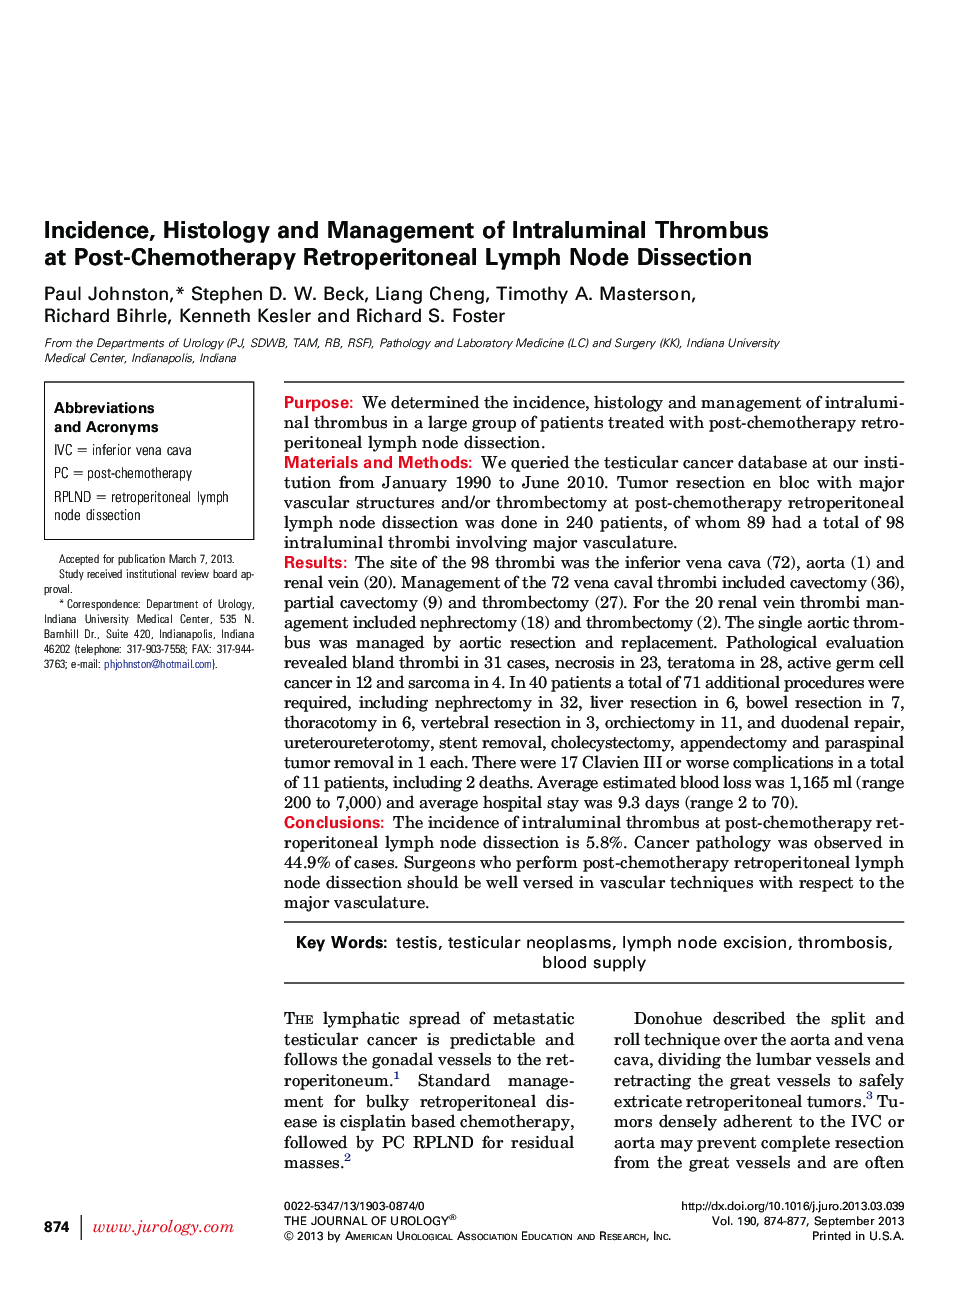 Incidence, Histology and Management of Intraluminal Thrombus at Post-Chemotherapy Retroperitoneal Lymph Node Dissection 